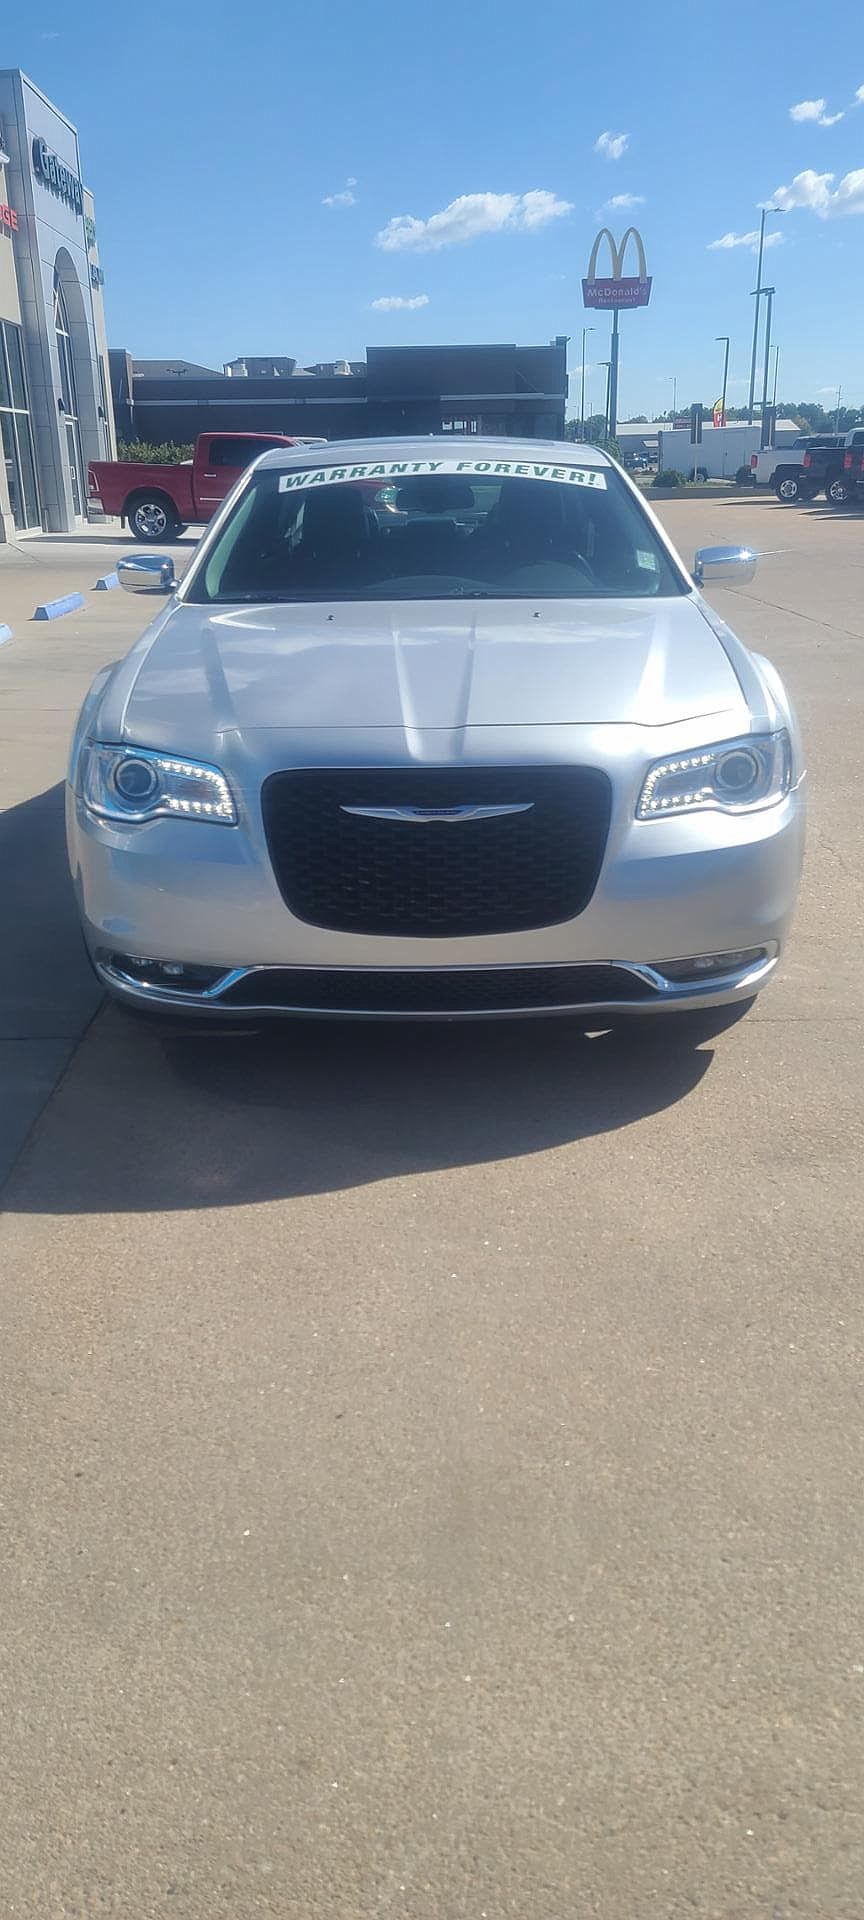 2020 Chrysler 300 Limited Edition image 2